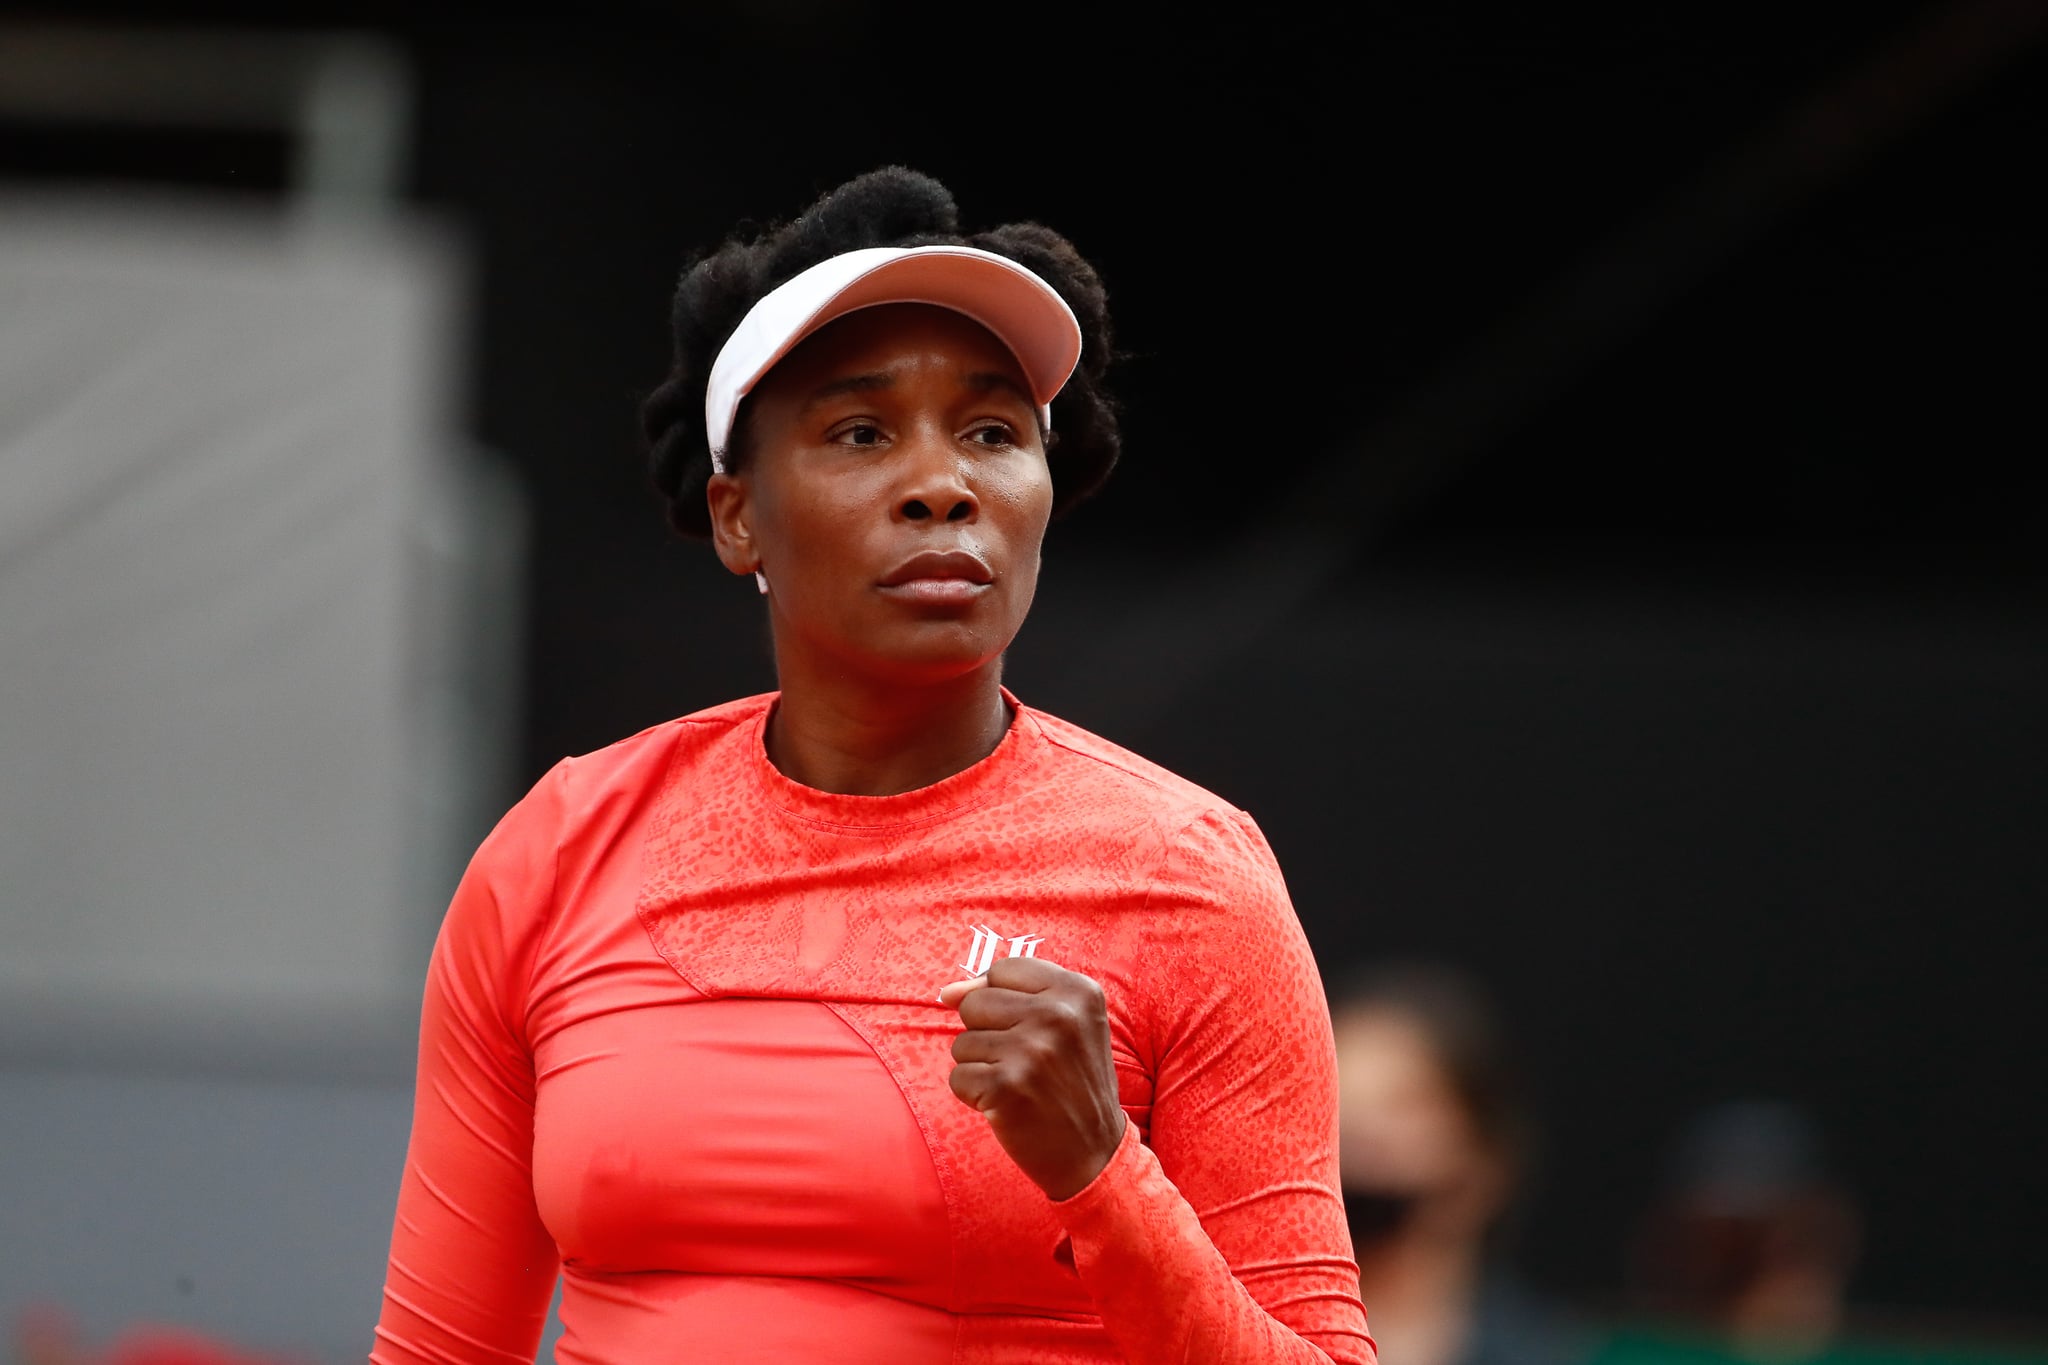 MADRID, SPAIN - APRIL 30: Venus Williams of Unitesd States celebrates during his Women's Singles match against Jennifer Brady of United States on day two of the WTA 1000 - Mutua Madrid Open 2021 at La Caja Magica on April 30, 2021 in Madrid, Spain (Photo by Oscar J. Barroso / Europa Press Sports via Getty Images)